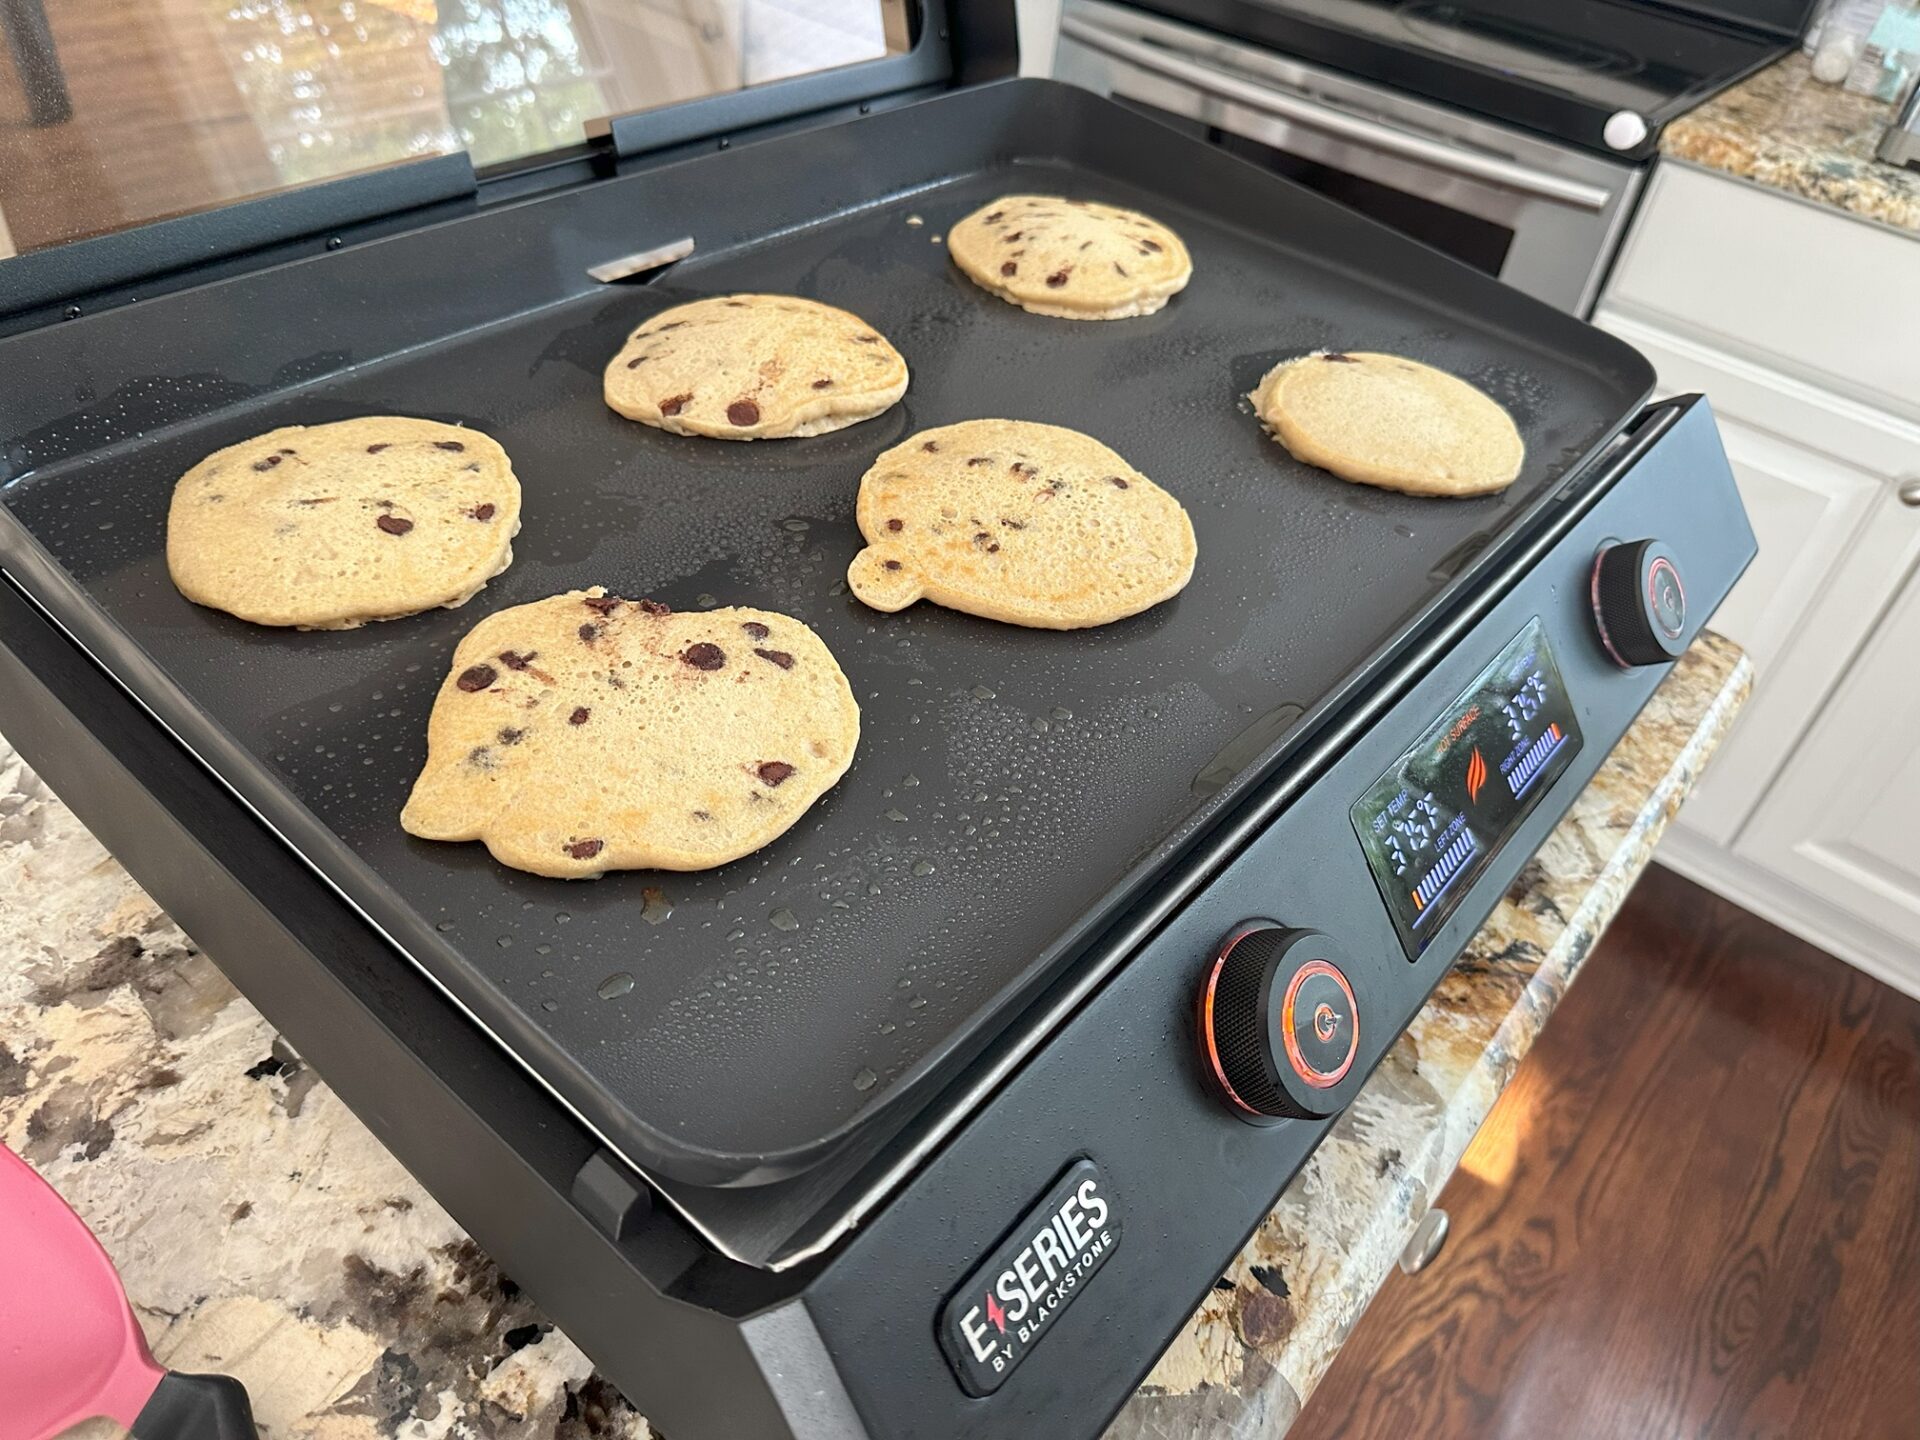 Blackstone Electric Griddle Review - Worth it but Has Limitations